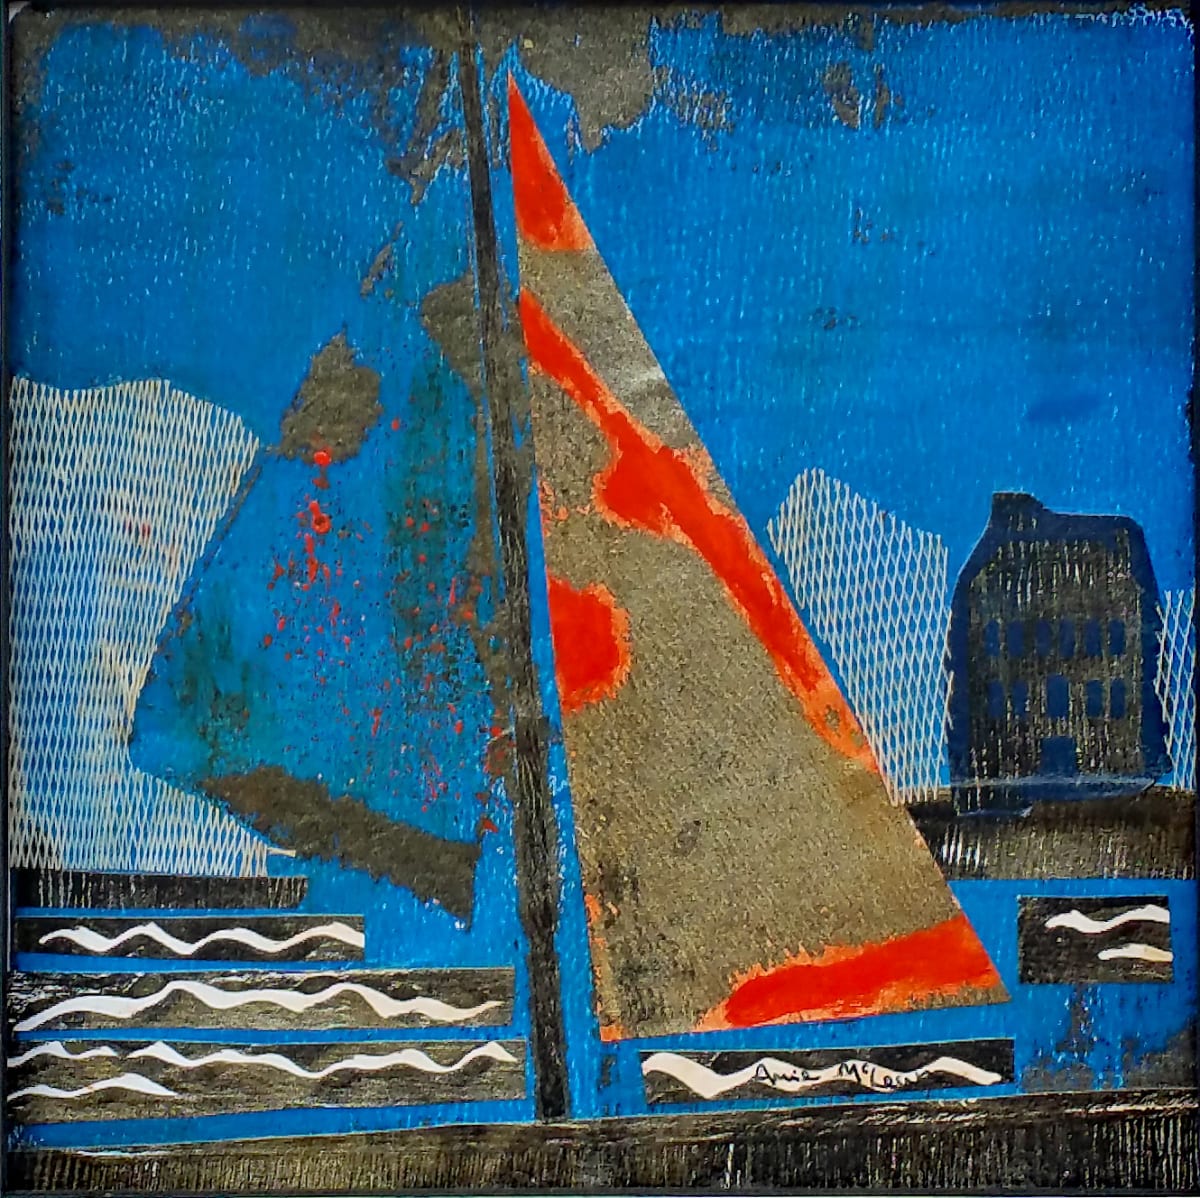 Sailing By by Annie McLean  Image: SAILING BY by Annie McLean